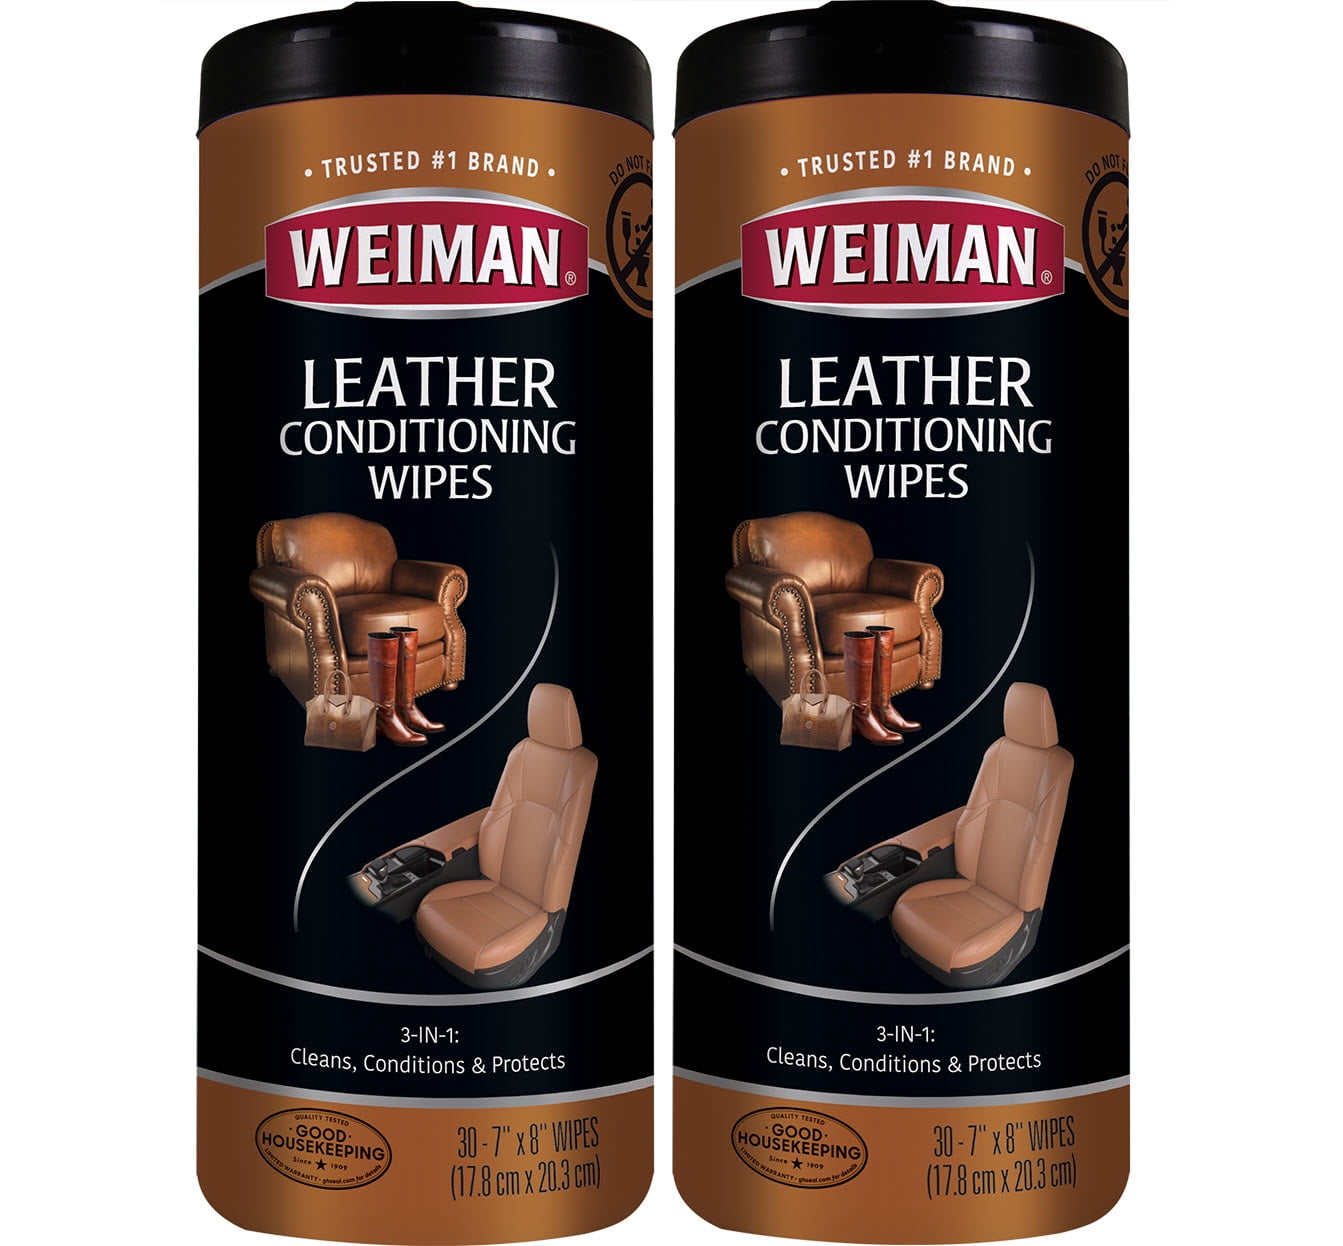 Weiman Leather Wipes - 2 Pack - Clean Condition UV Protection Help Prevent Cracking or Fading of Leather Furniture, Car SEATS & Interior, Shoes and Mo